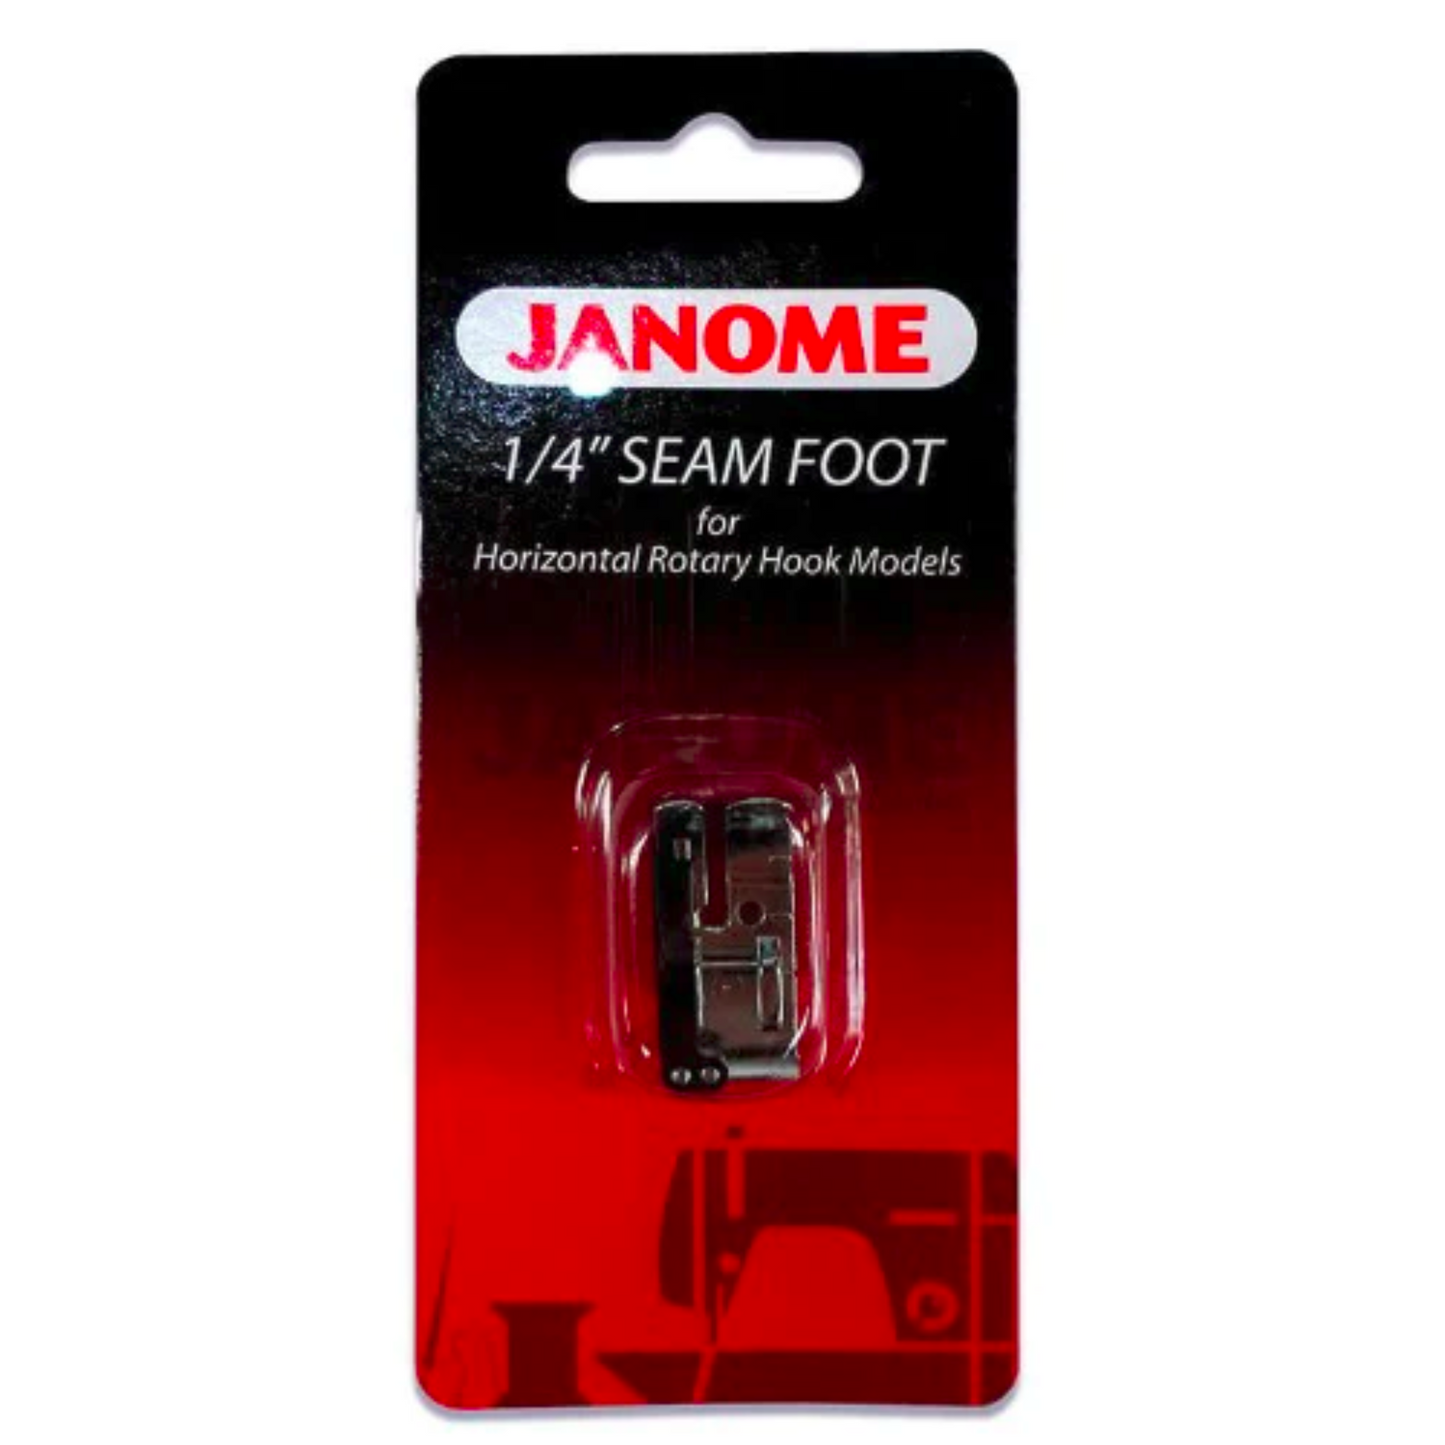 Janome 1/4 seam foot - Sewing accessory - Silver - Packet